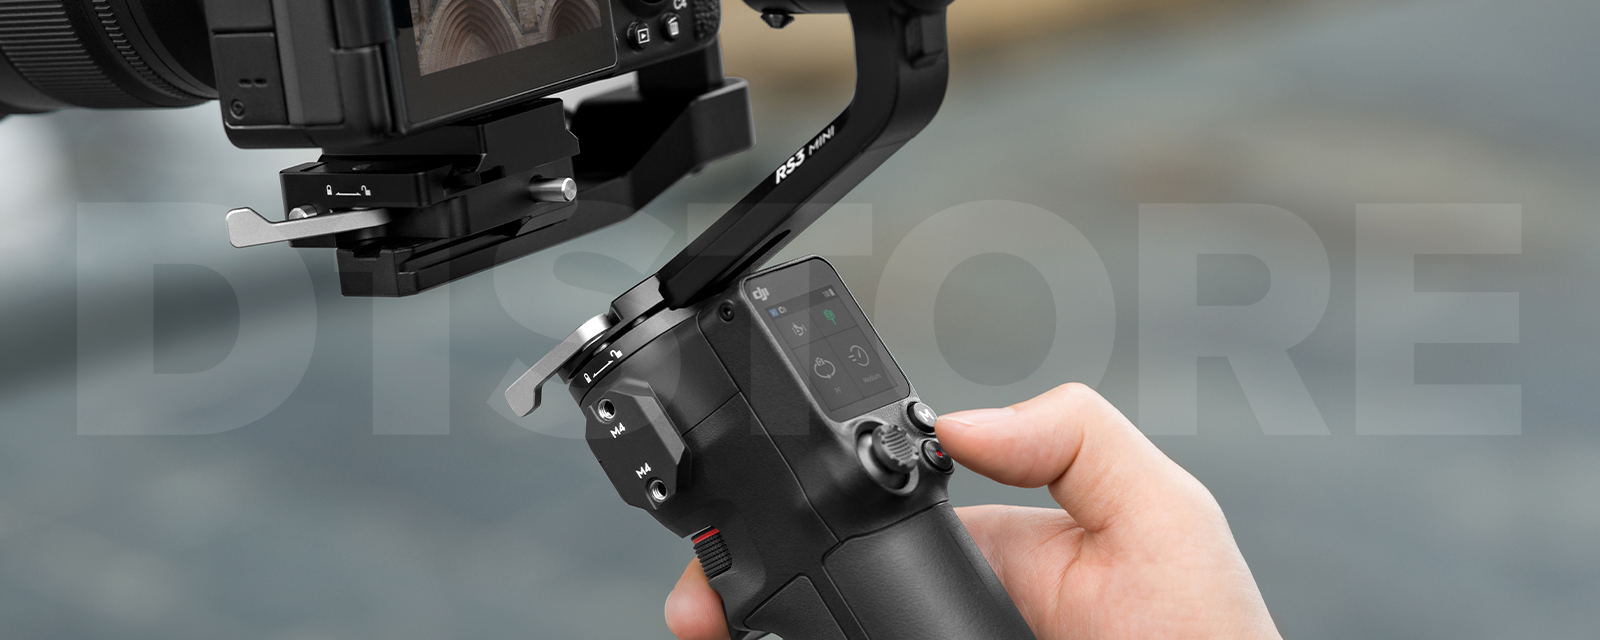 DJI RS3 Camera Compatibility Guide: Canon, Sony, Nikon and More | D1 Lounge